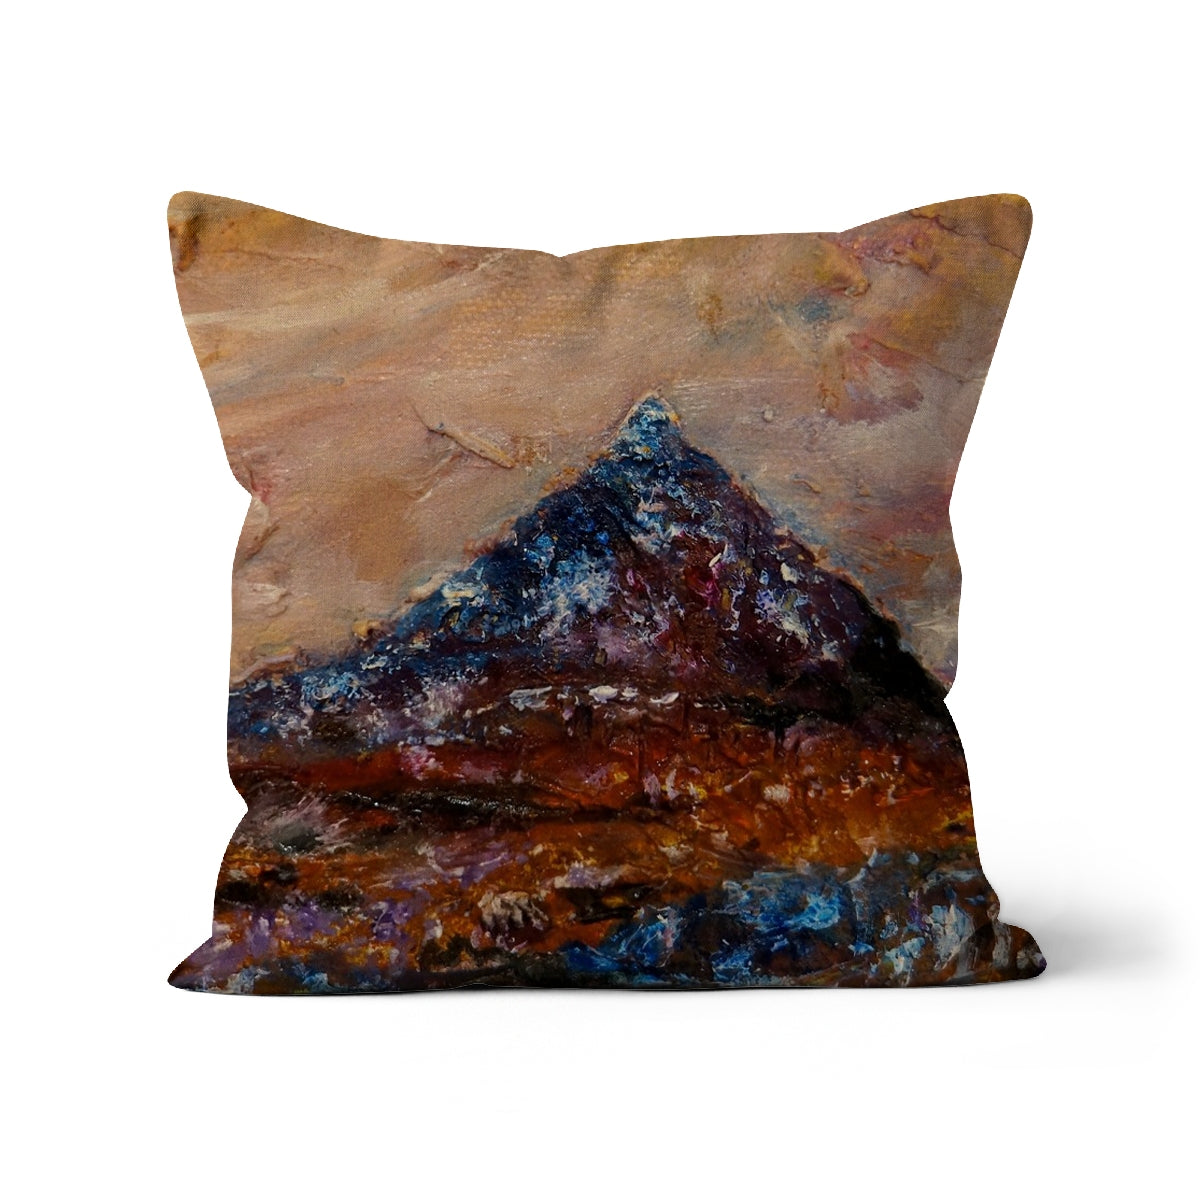 Buachaille Etive Mòr Art Gifts Cushion-Cushions-Glencoe Art Gallery-Canvas-16"x16"-Paintings, Prints, Homeware, Art Gifts From Scotland By Scottish Artist Kevin Hunter